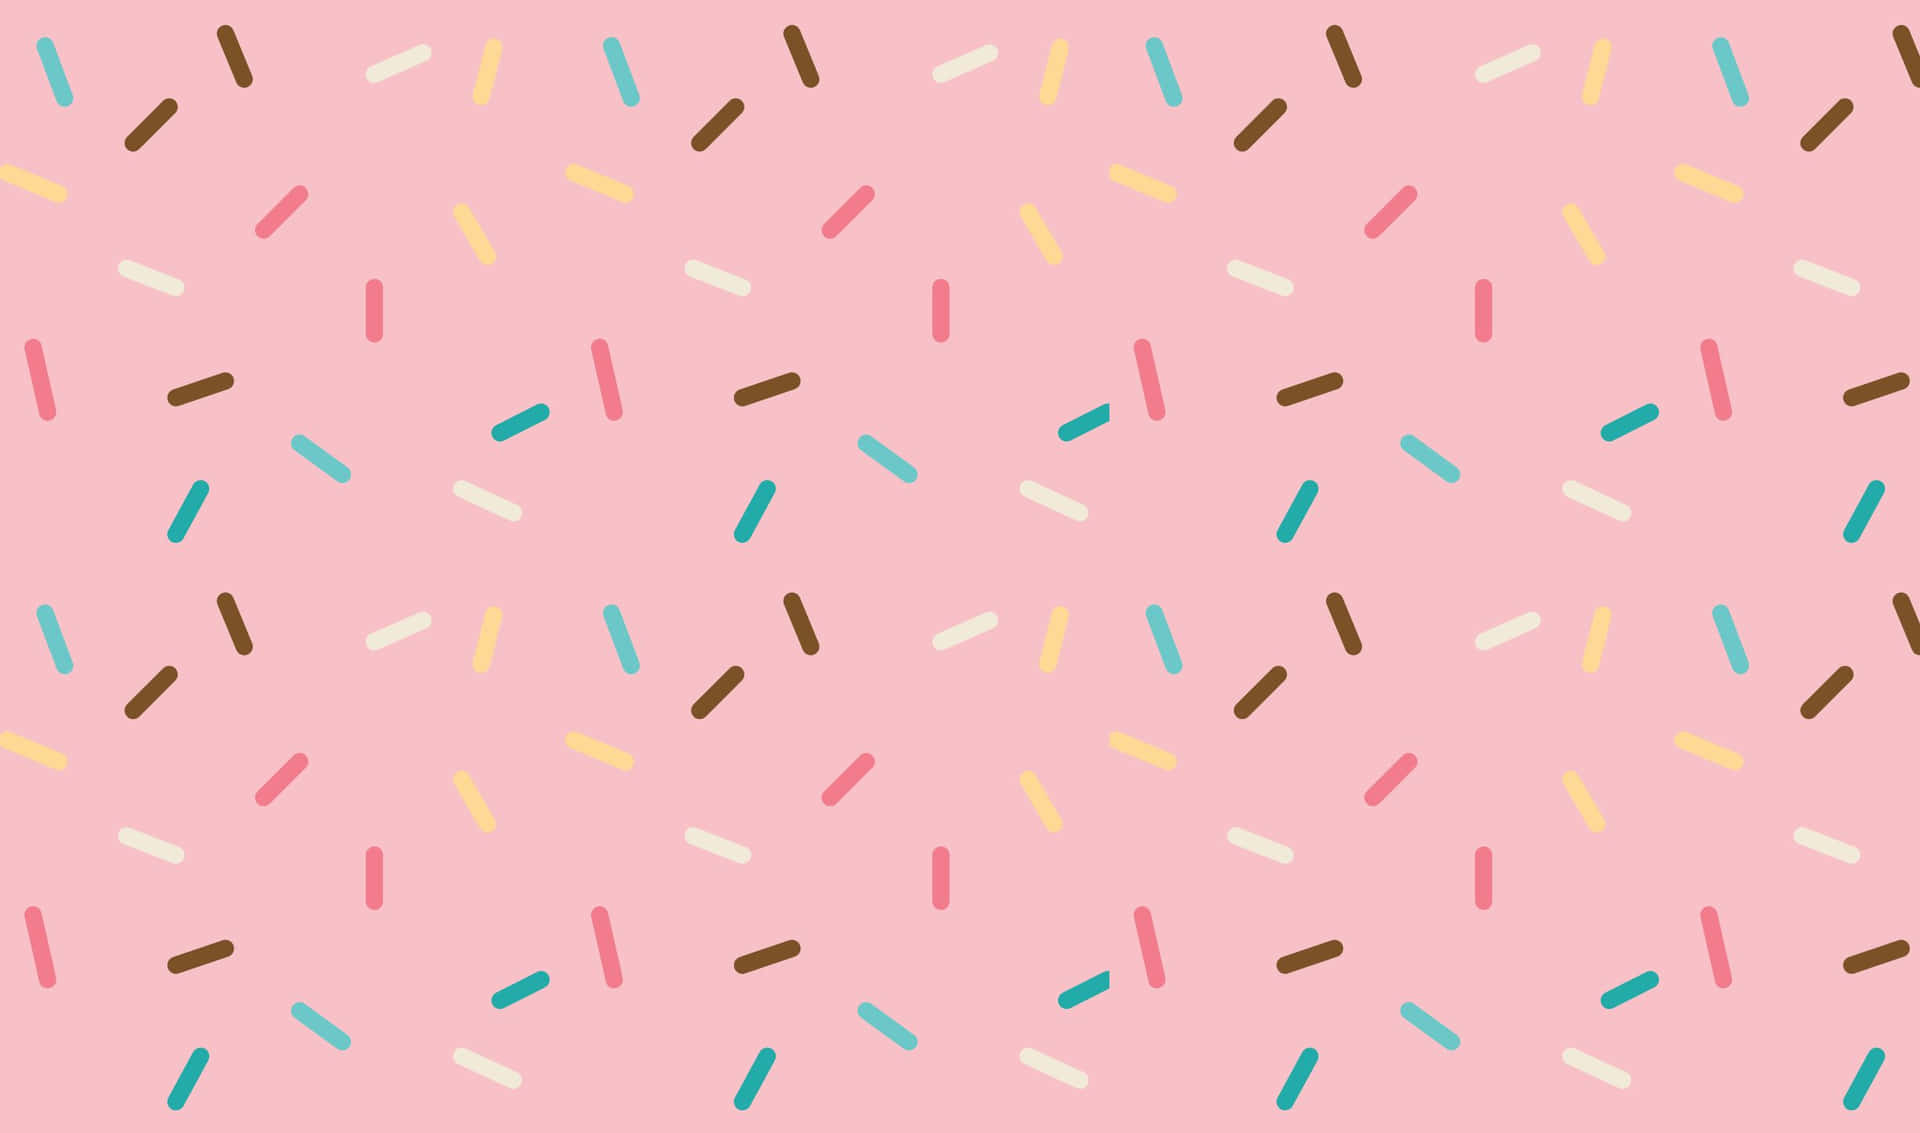 Sprinkles Images | Free Photos, PNG Stickers, Wallpapers & Backgrounds -  rawpixel